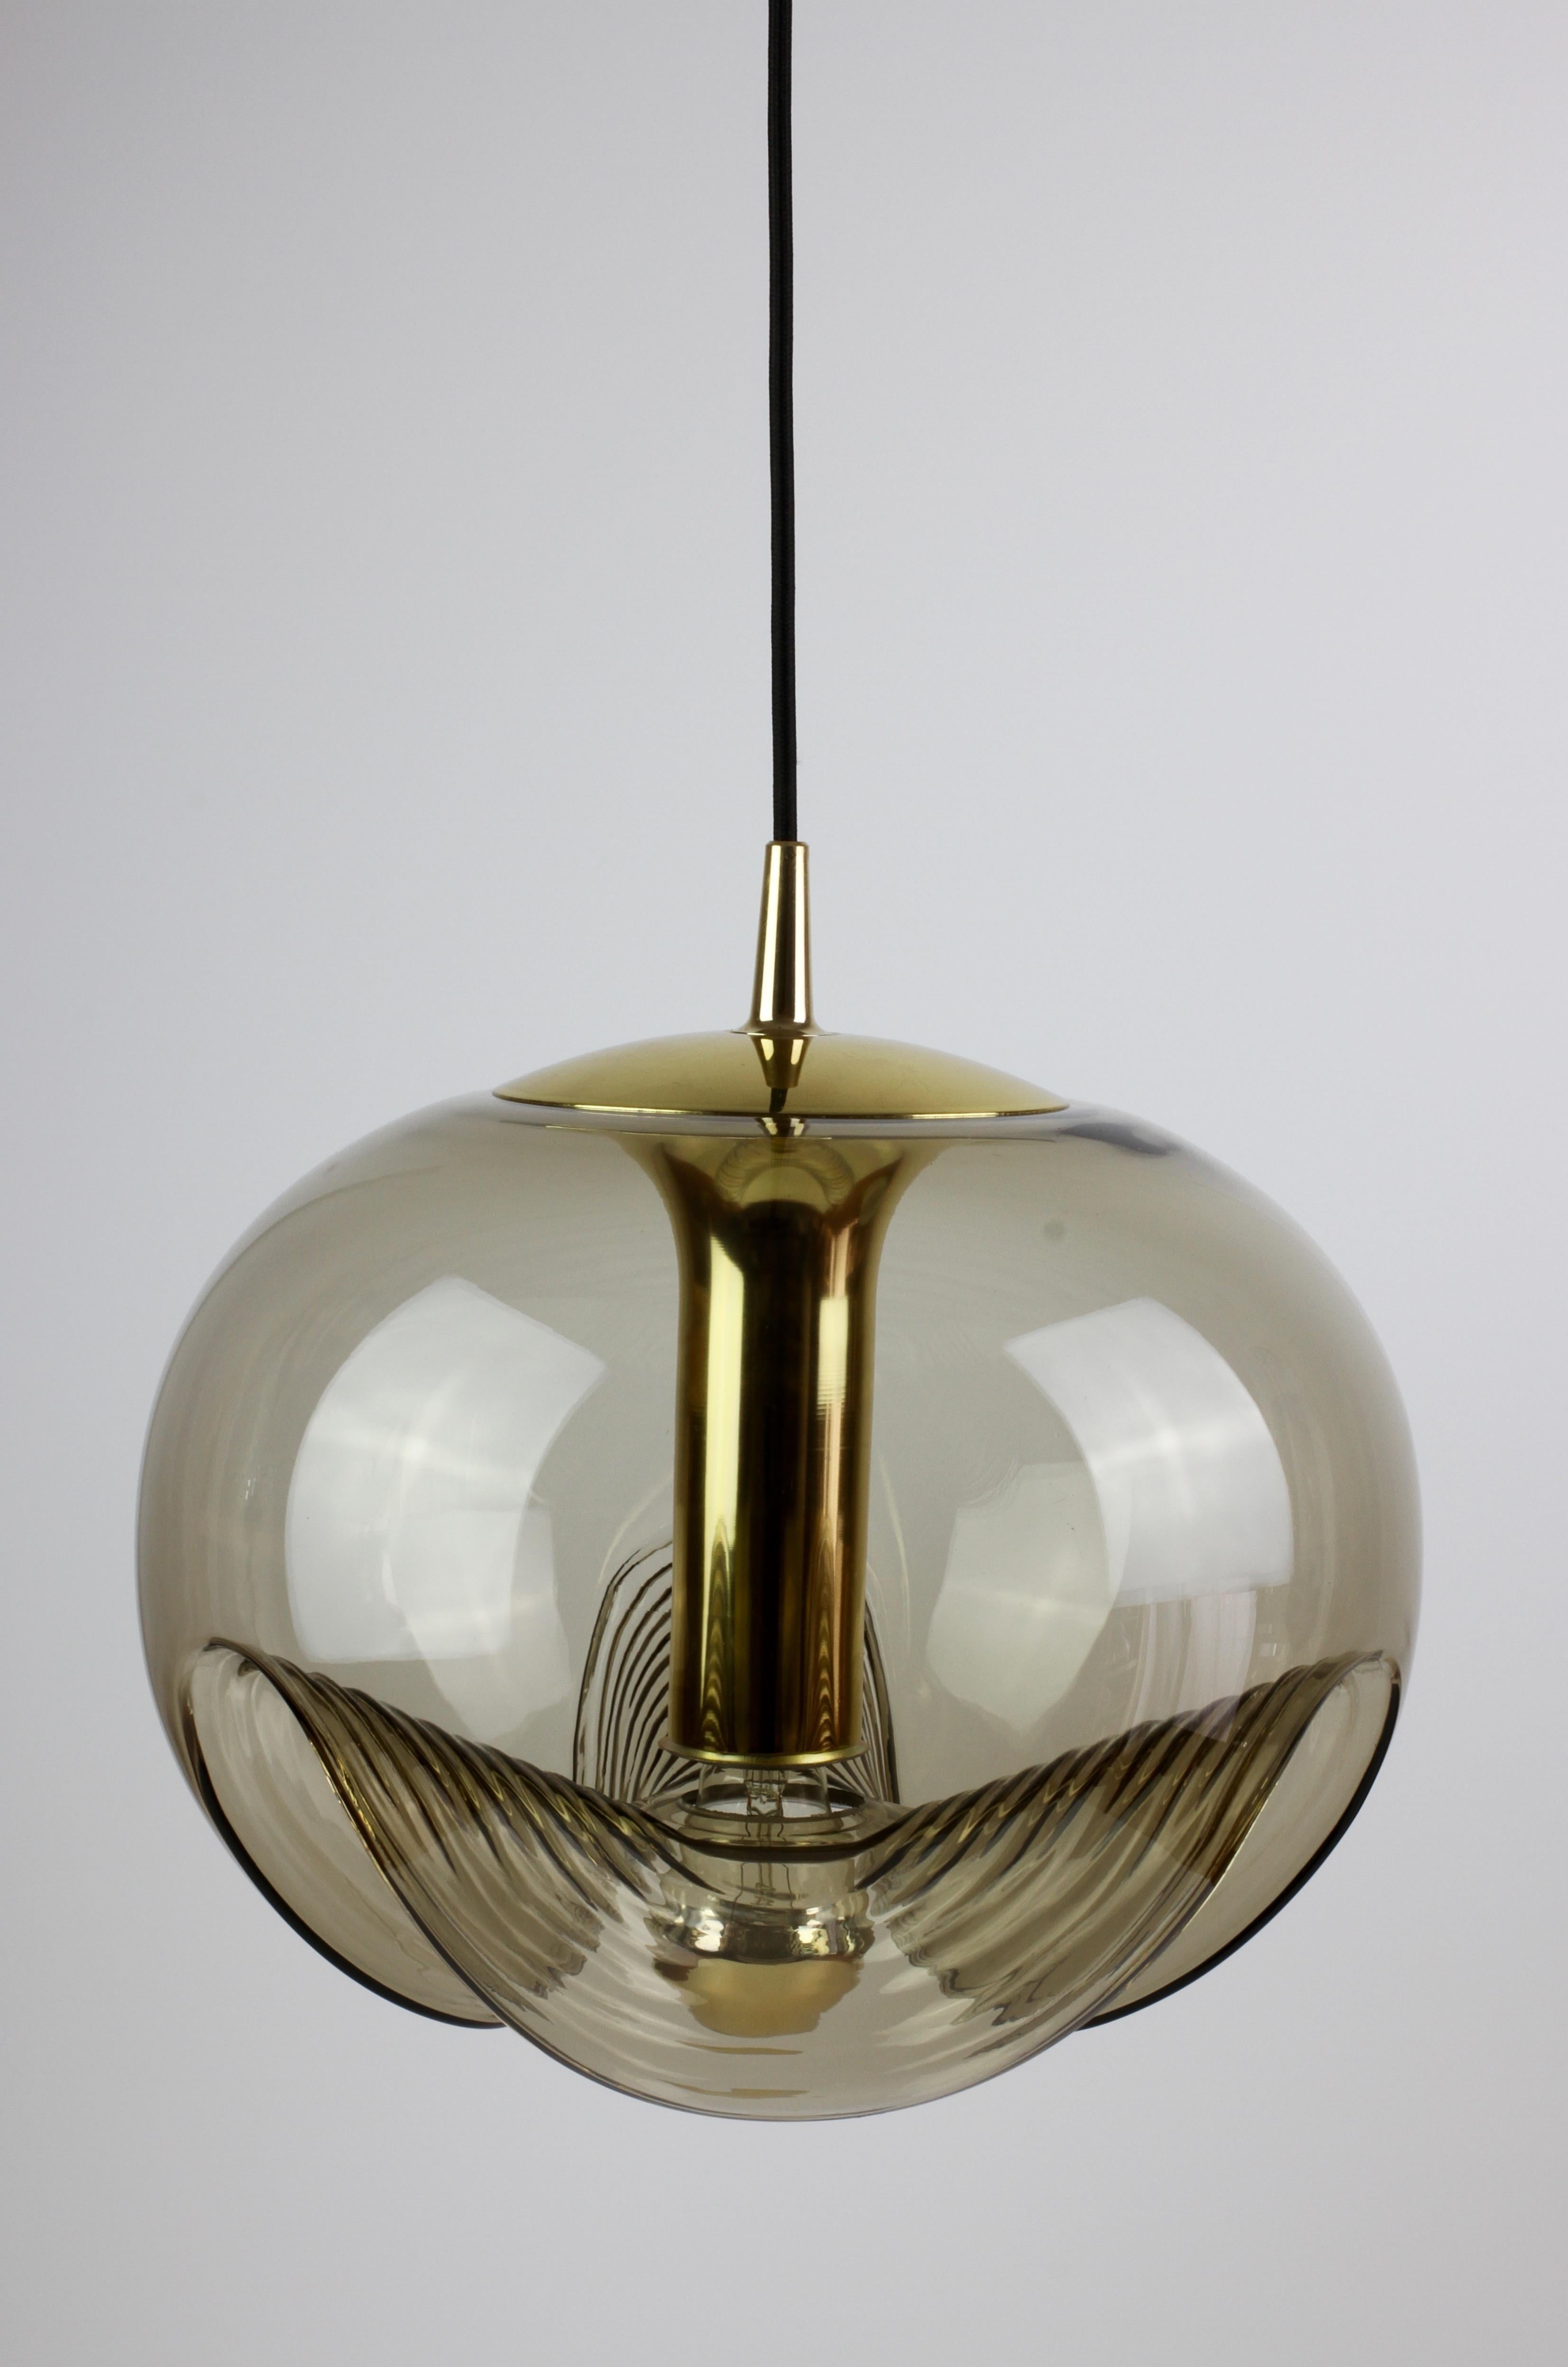 One of a beautiful pair mid-century design by Koch & Lowy for Peill & Putzler in the 1970s. This is an absolutely classic piece of design, featuring a smoked colored (colored) glass globe shade with a waved / ribbed moulded bubble form, casting a